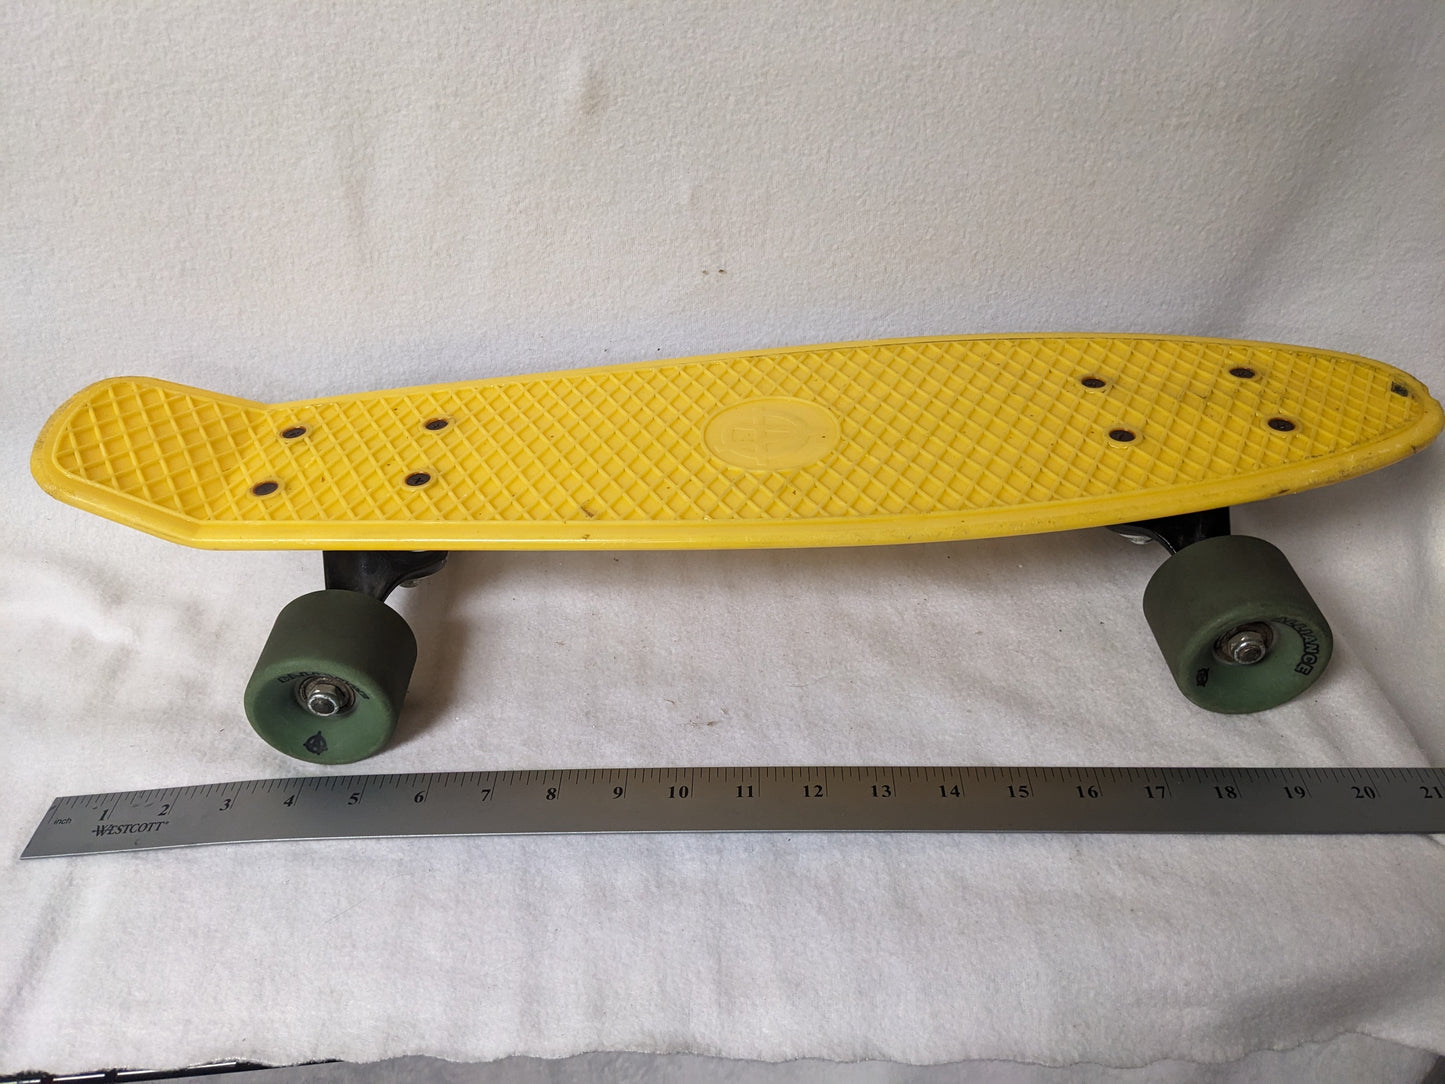 Alliance Youth Skateboard Size 22 In Color Yellow Condition Used